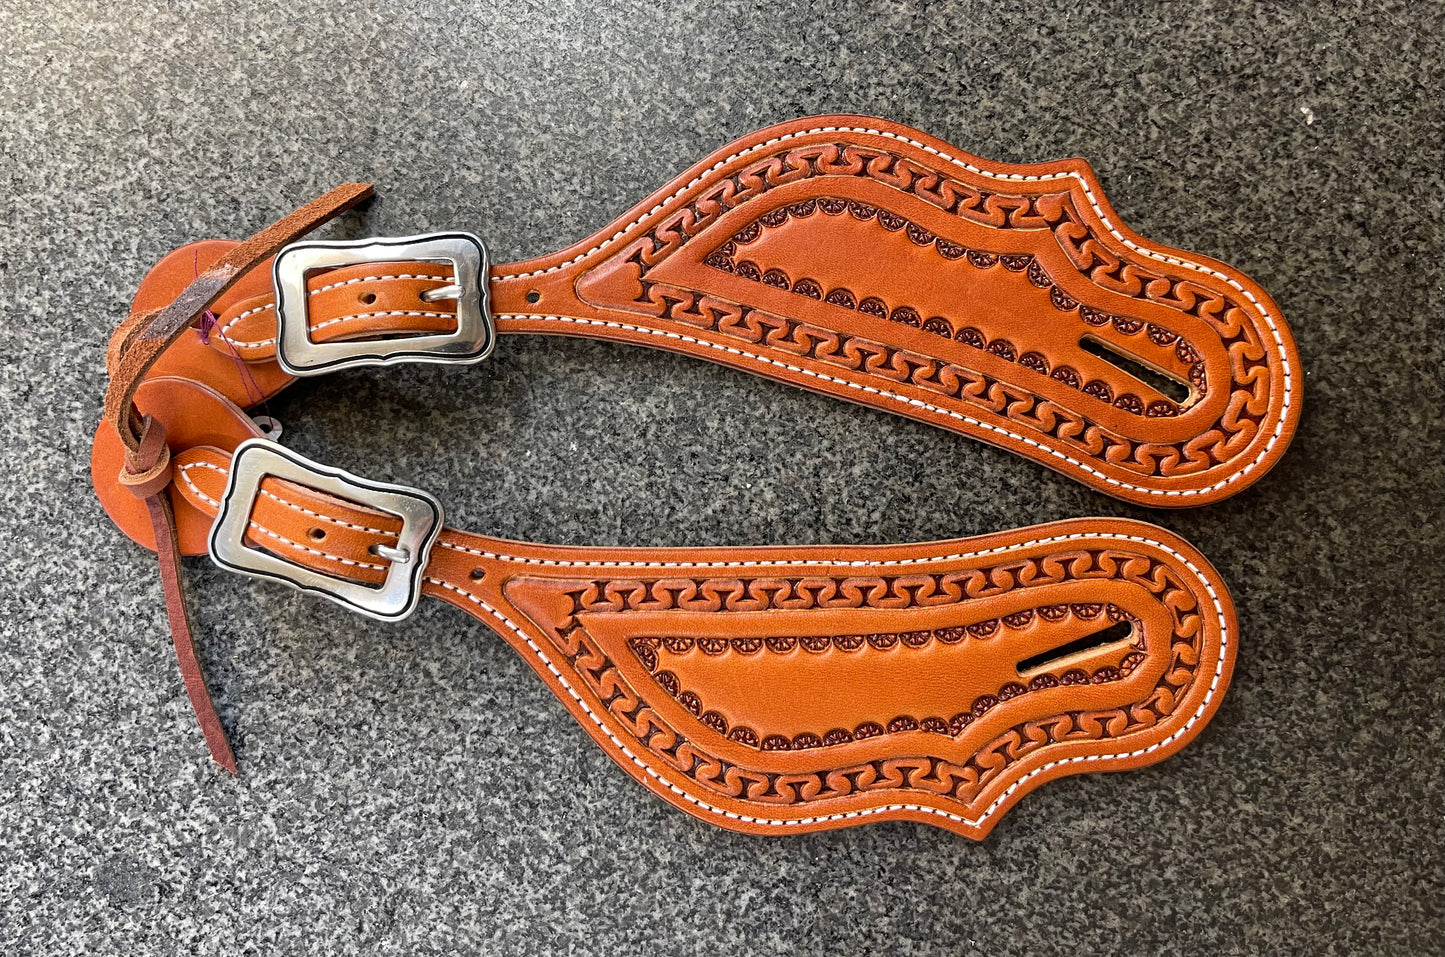 Carlos Boarder Stamped Tear Drop Spur Straps - Ready to Ship